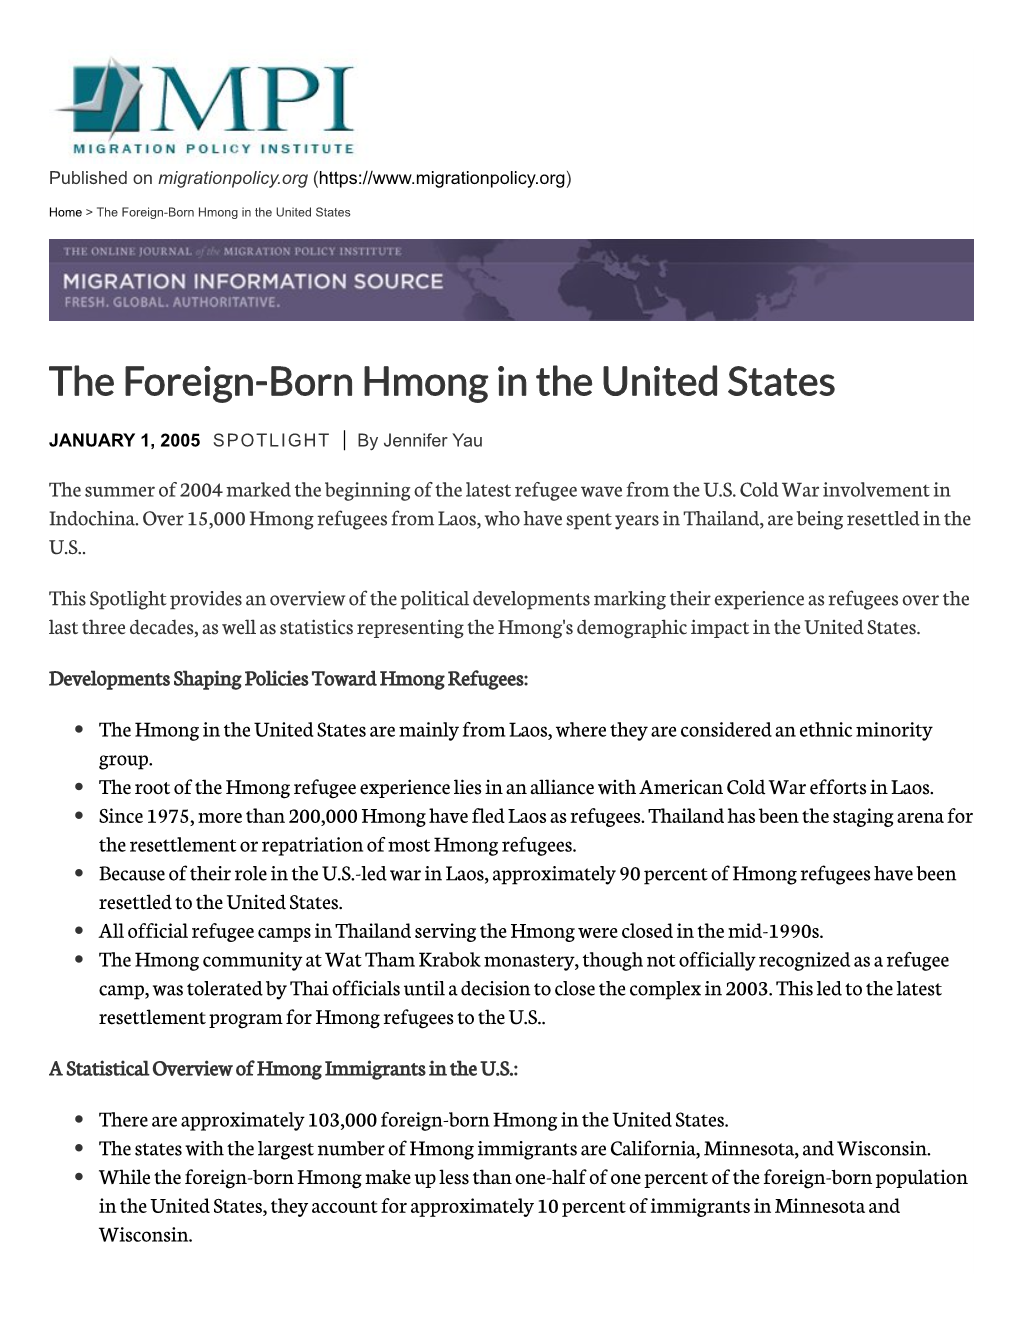 The Foreign-Born Hmong in the United States